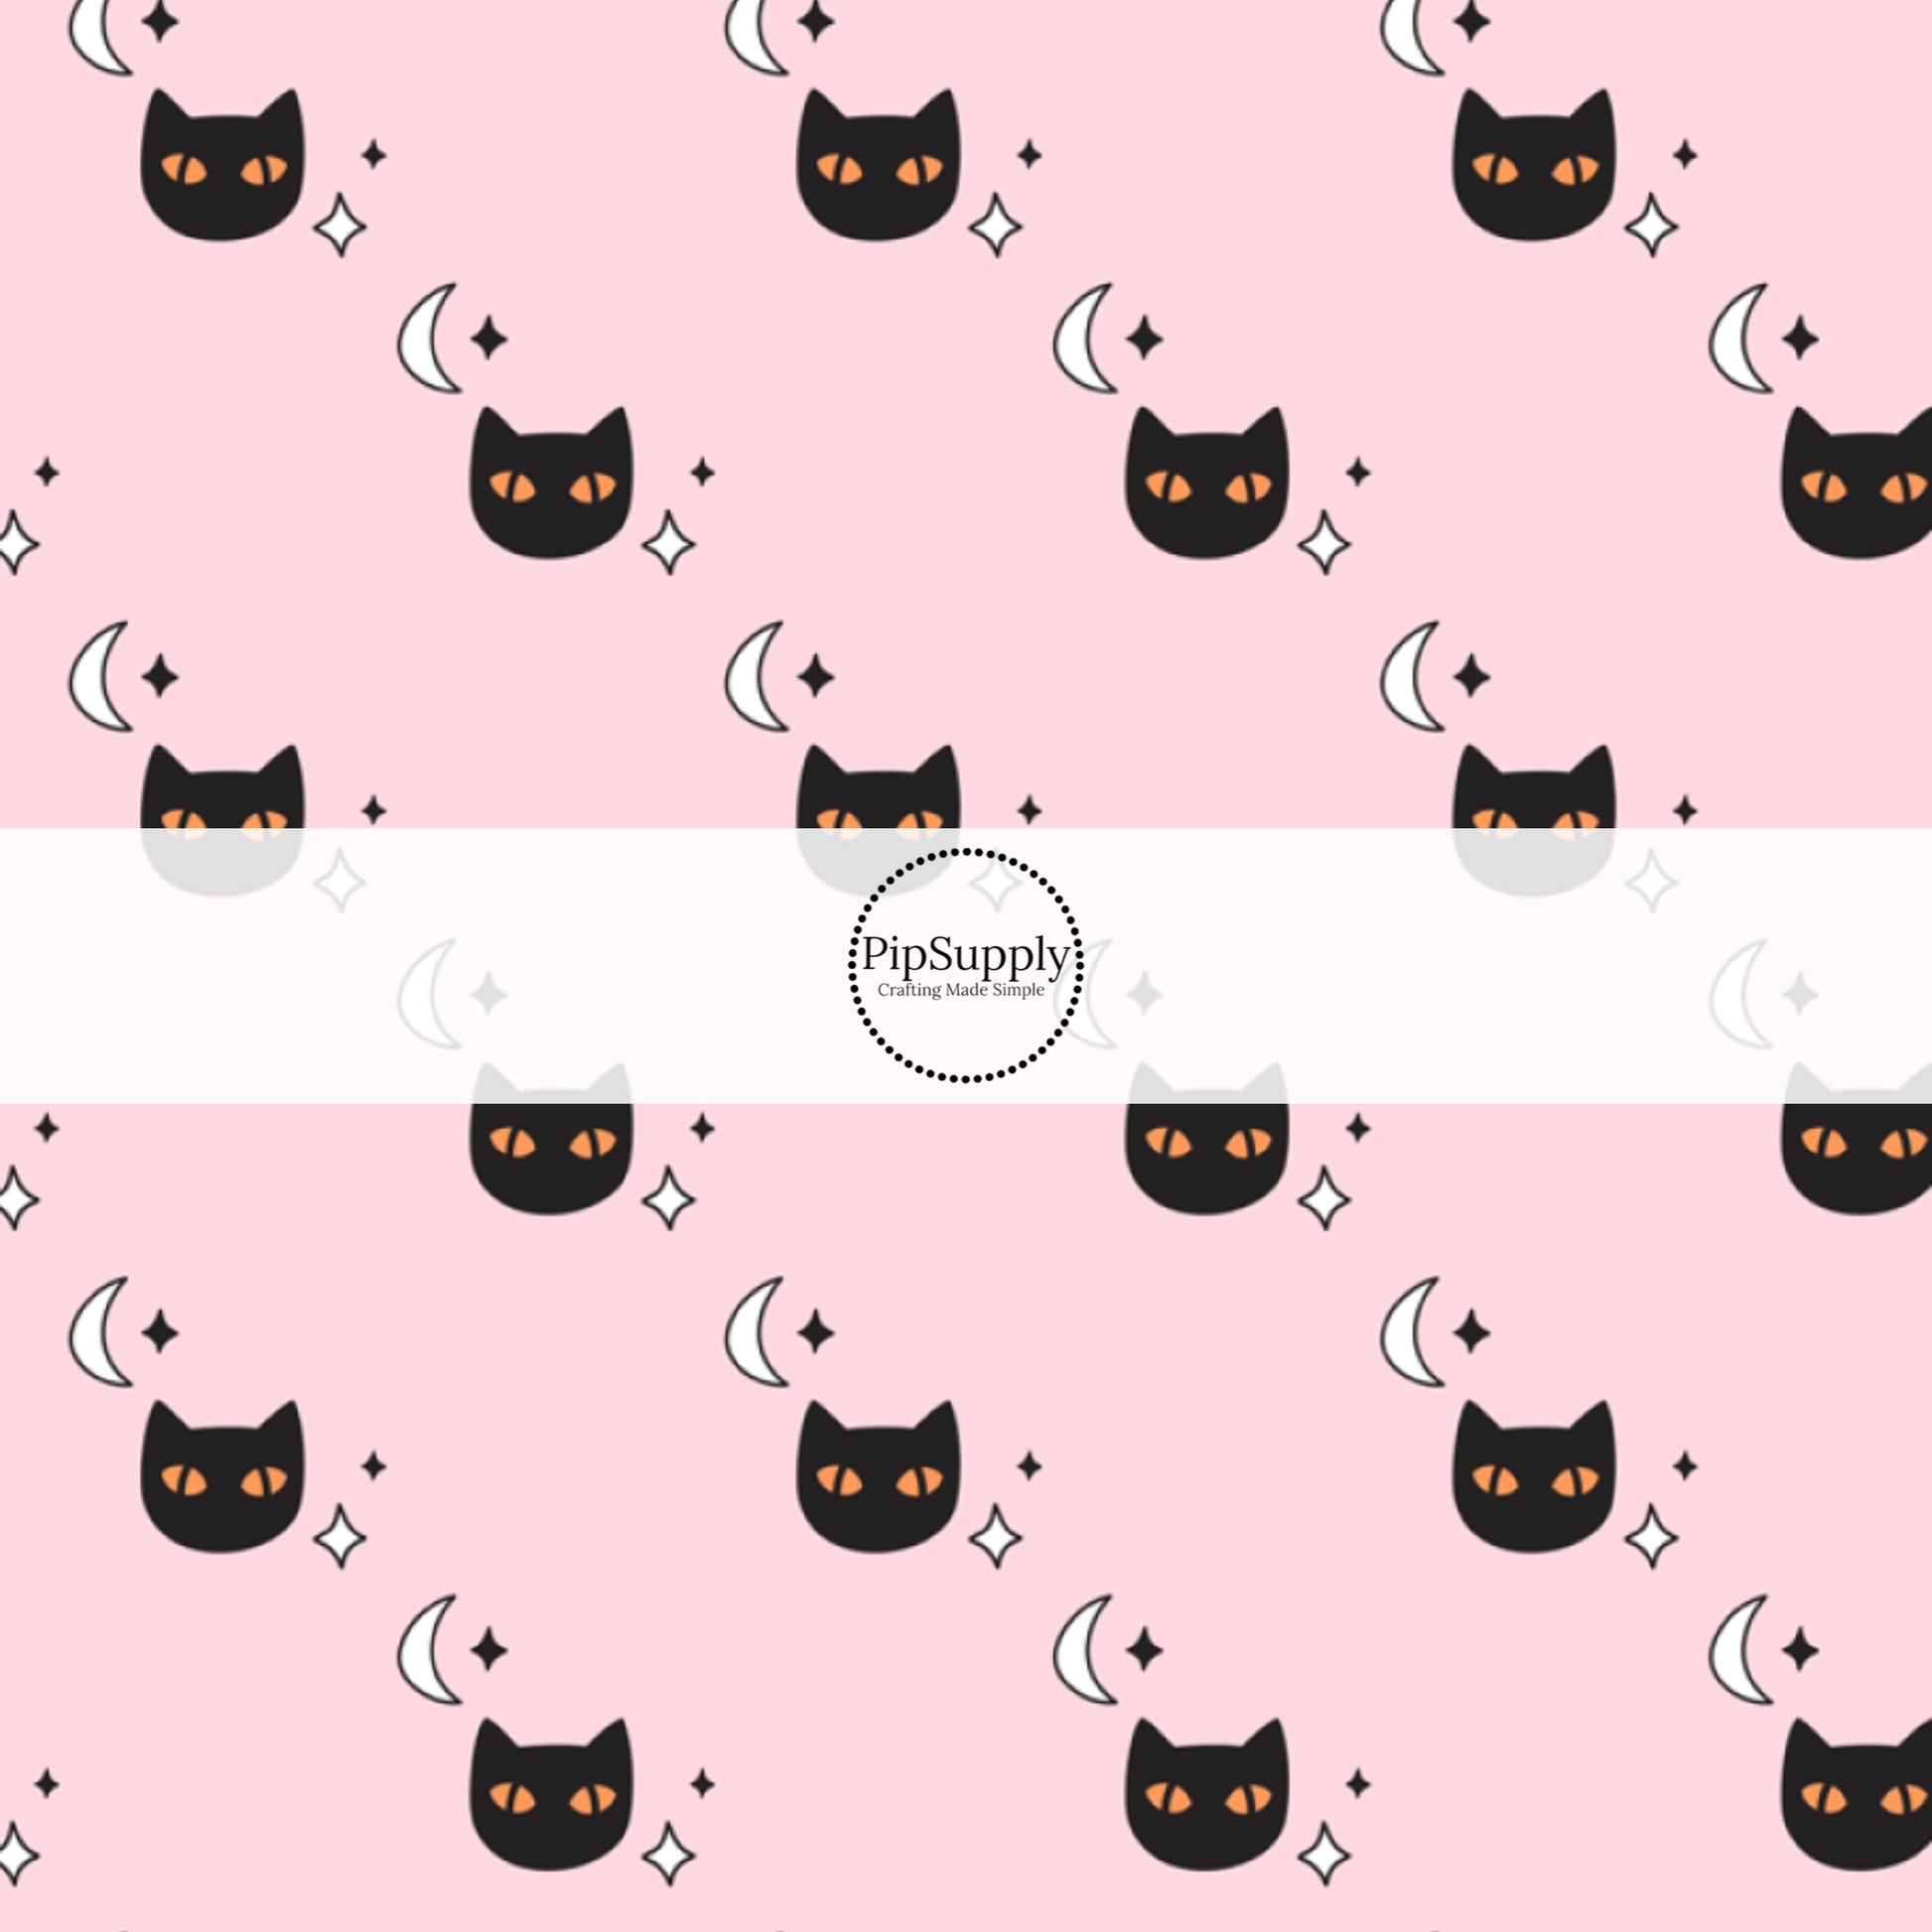 Moons and stars with black cats on light pink hair bow strips